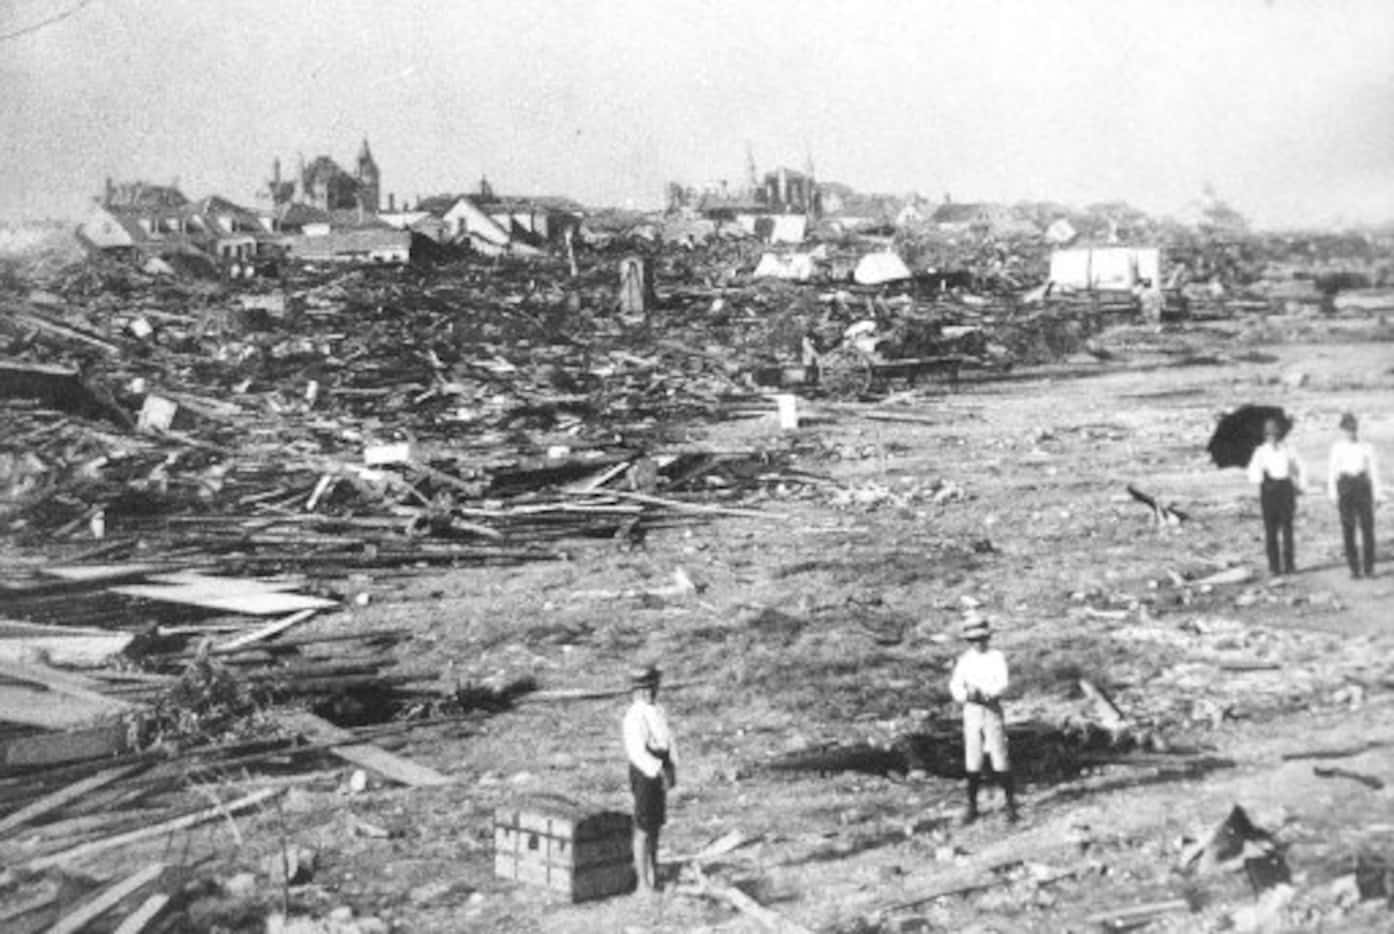 A large part of Galveston was reduced to rubble after being hit by a powerful hurricane on...